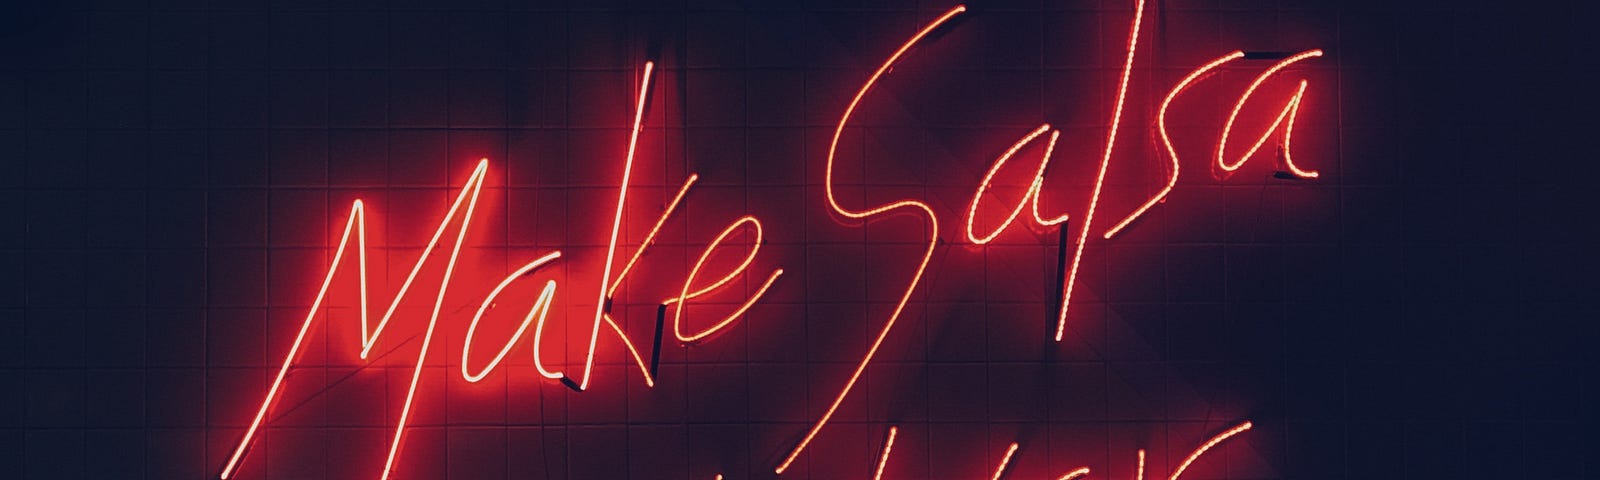 Neon sign that says “make salsa not war” in red on a black background